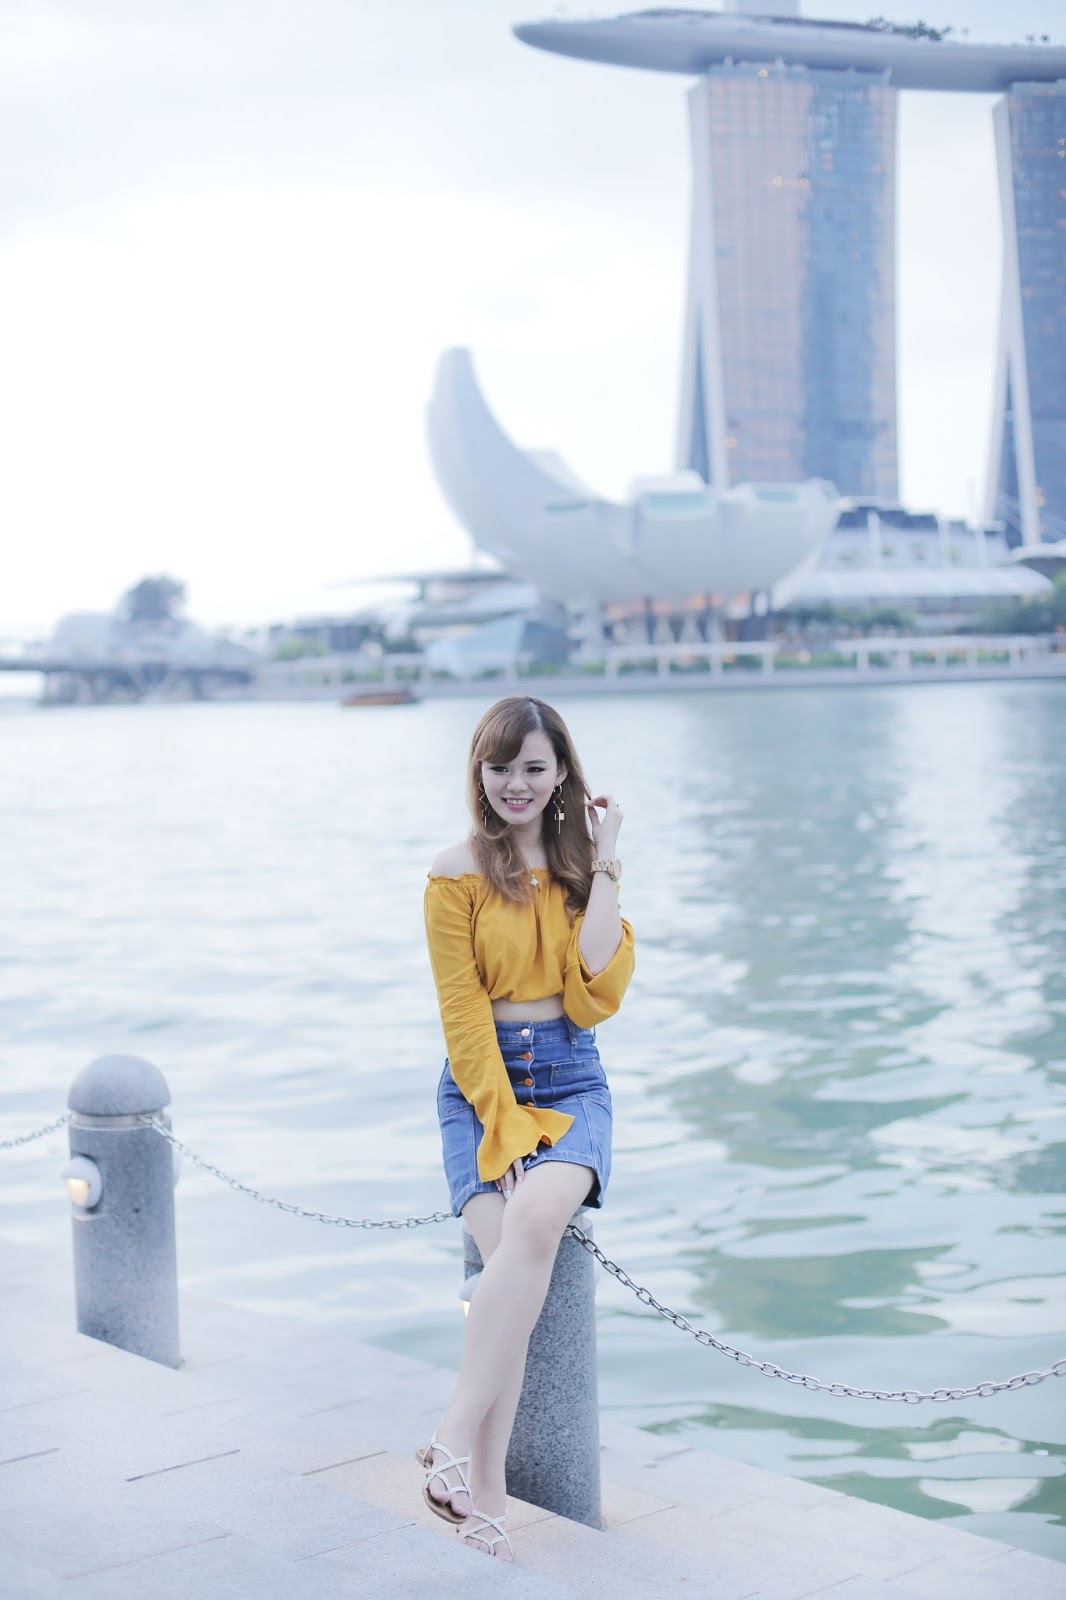 h&m, forever 21, casual outfit, fashion, ootd, jeanmilka ootd, fashion blogger, fashion blogger indonesia, singapore, marina bay sands, travel to singapore, indonesia fashion blogger